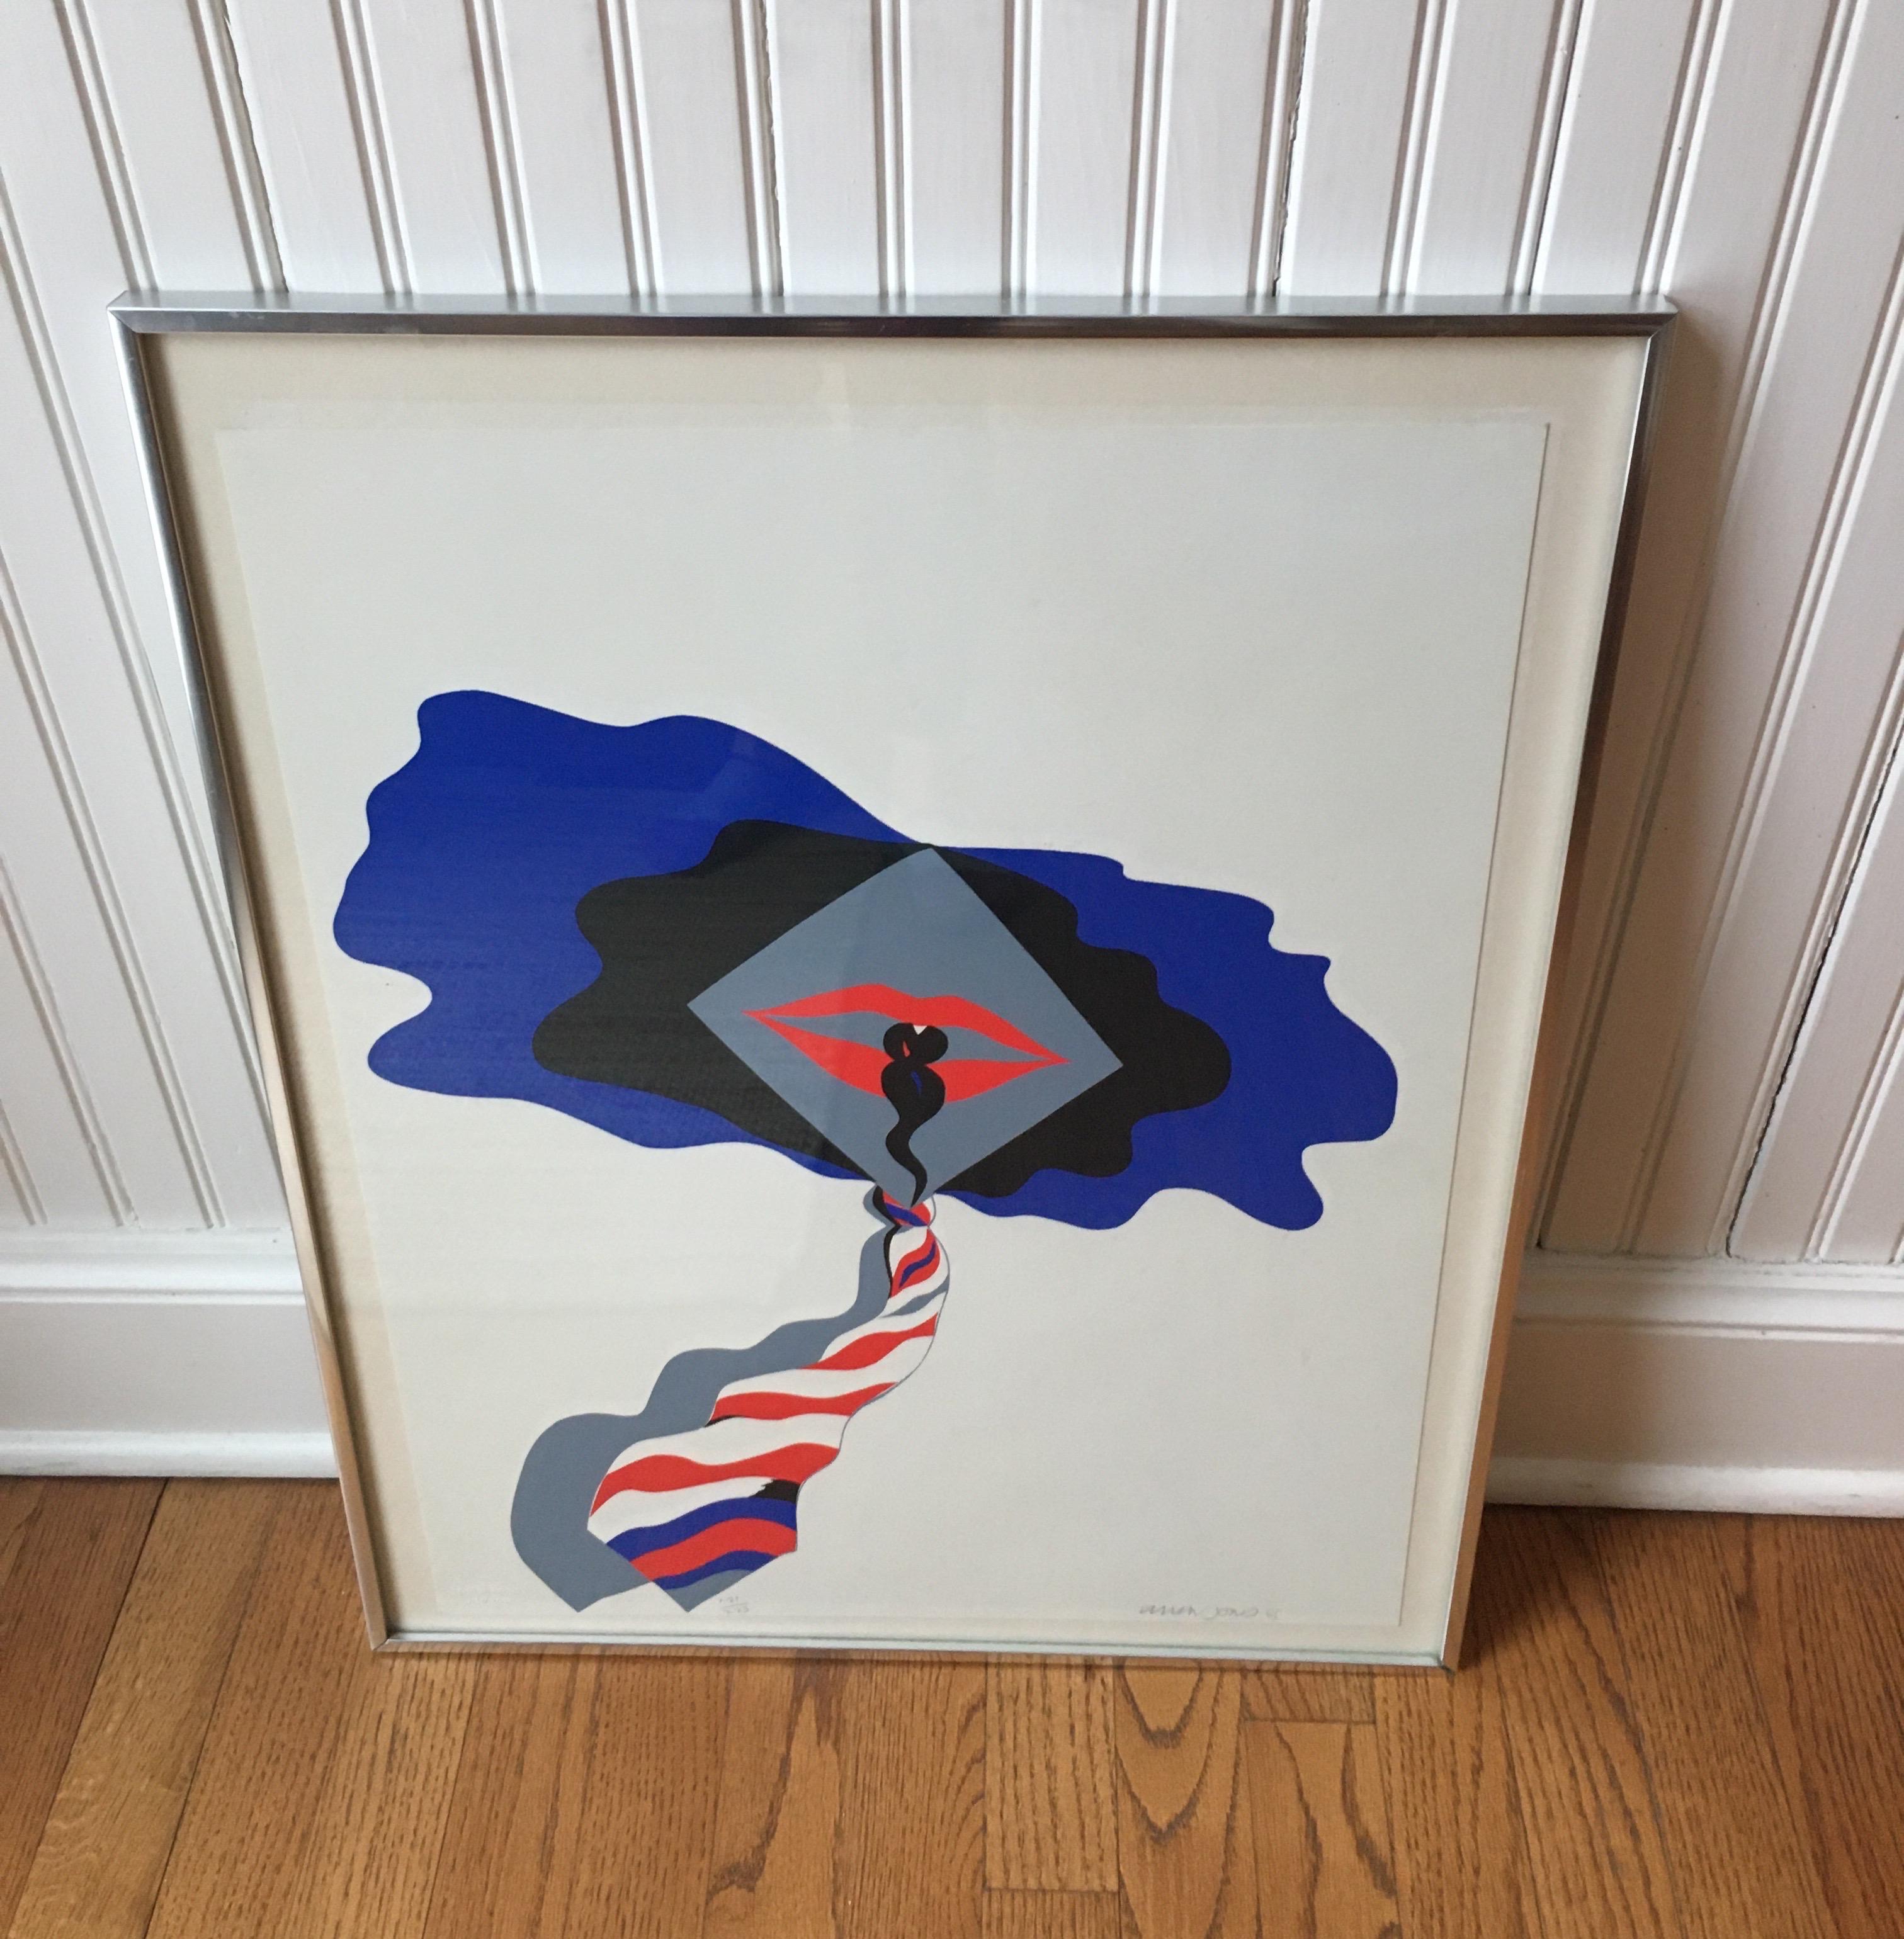 A hand signed and numbered serigraph by Allen Jones in original frame. “Self”.